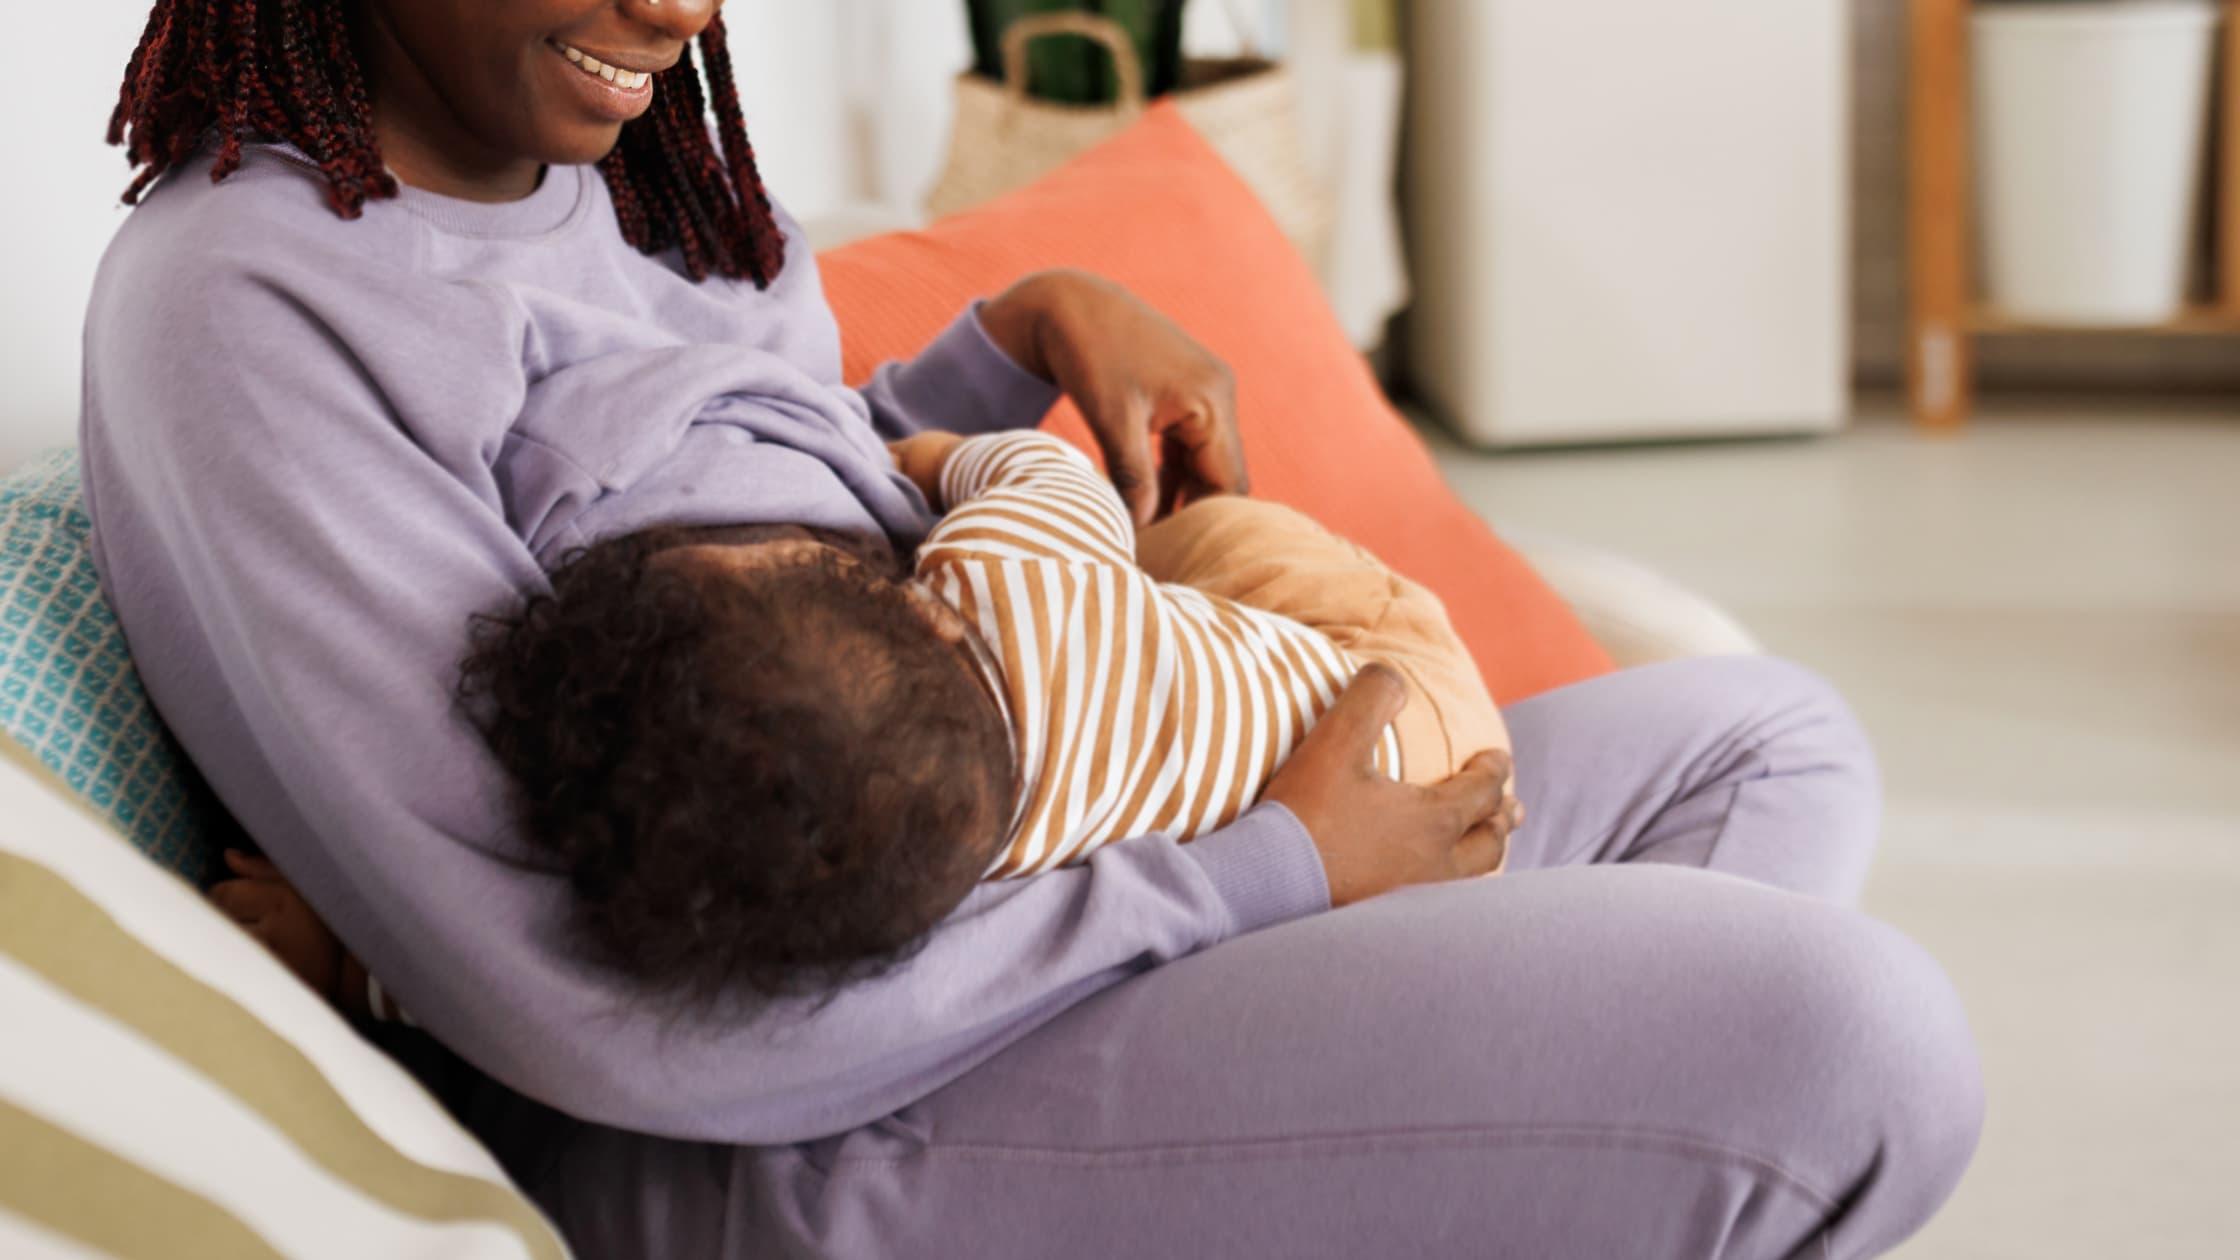 Breastfeeding and Milk Supply: What Every New Mom Should Know